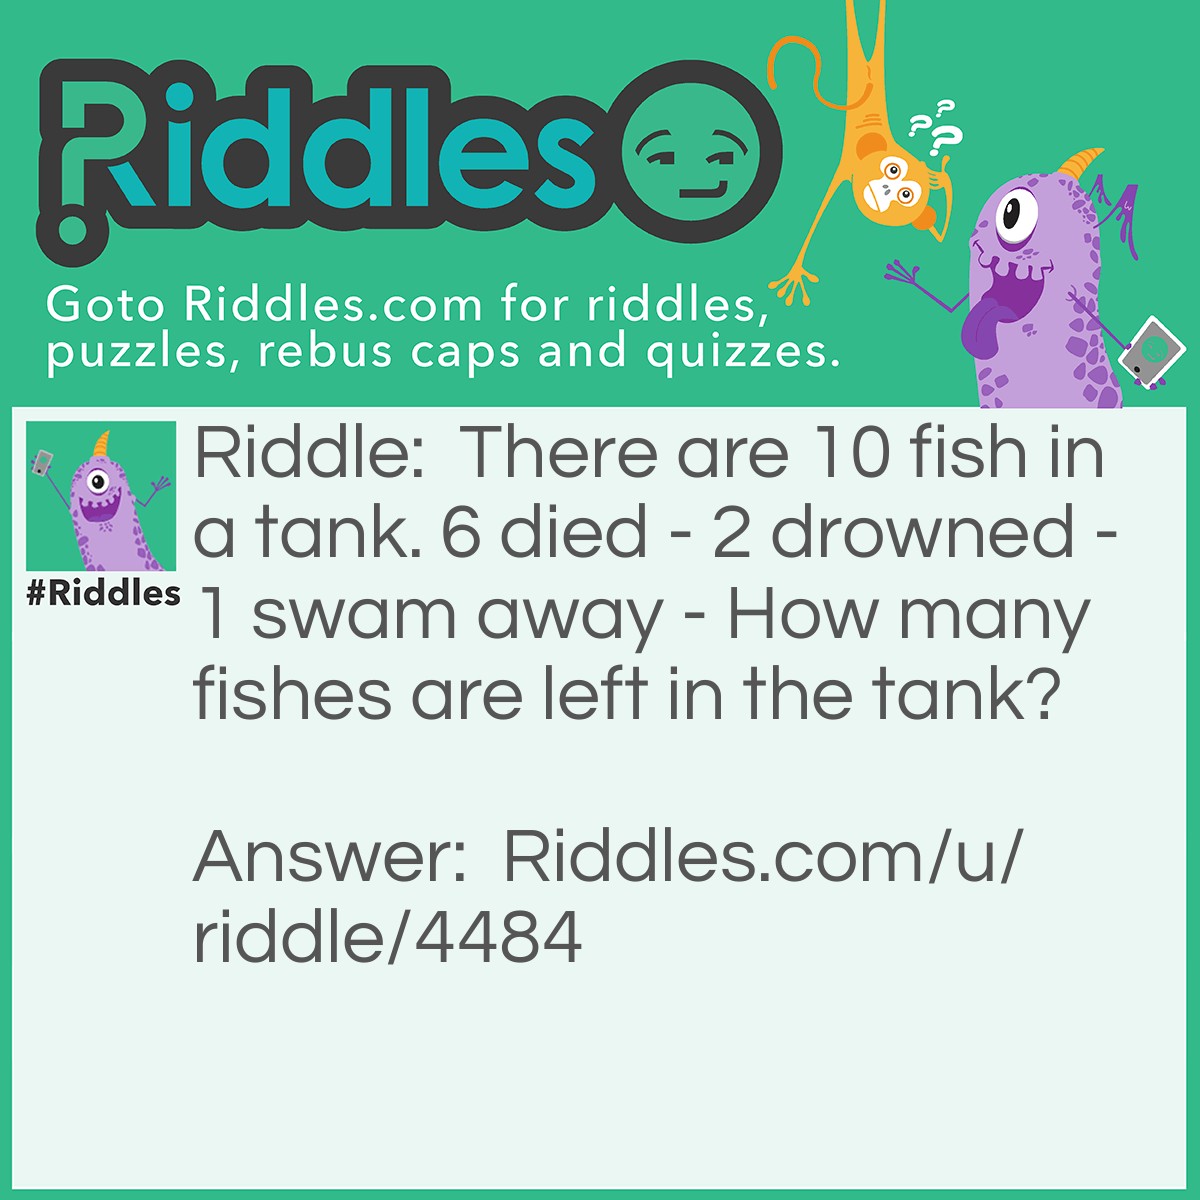 Riddle: There are 10 fish in a tank. 6 died - 2 drowned - 1 swam away - How many fishes are left in the tank? Answer: 10 fish! Even though 6 are dead they're still in the tank. 2 fish drowned... since when can a fish drown? 1 swam away, this fish can swim farther than the limits of the aquarium.